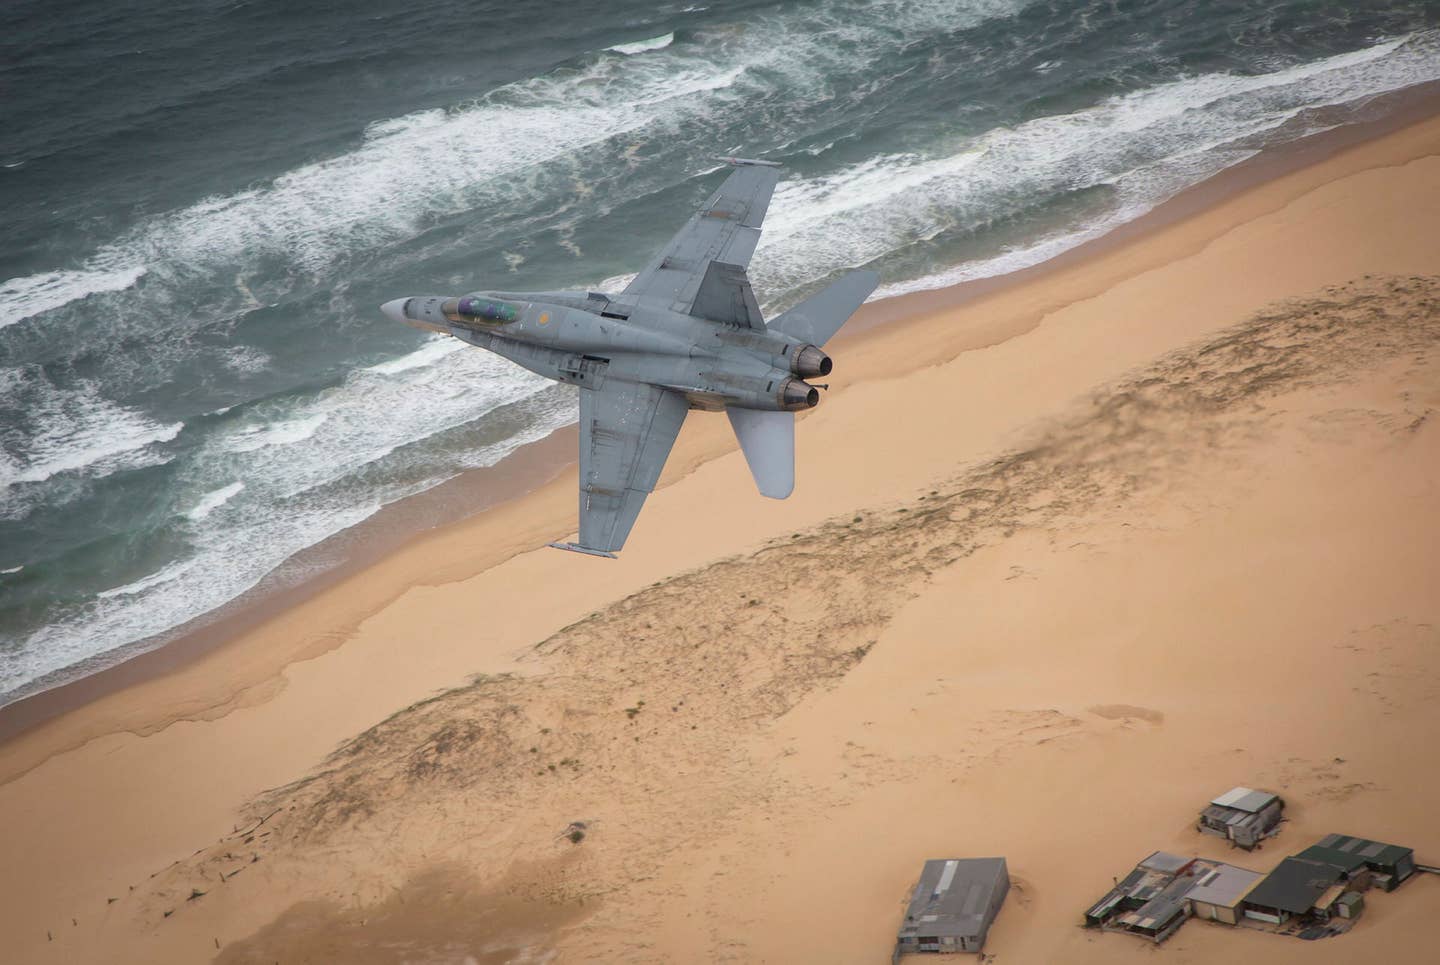 A RAAF Hornet in action low over the coast during its time in service. (RAAF)